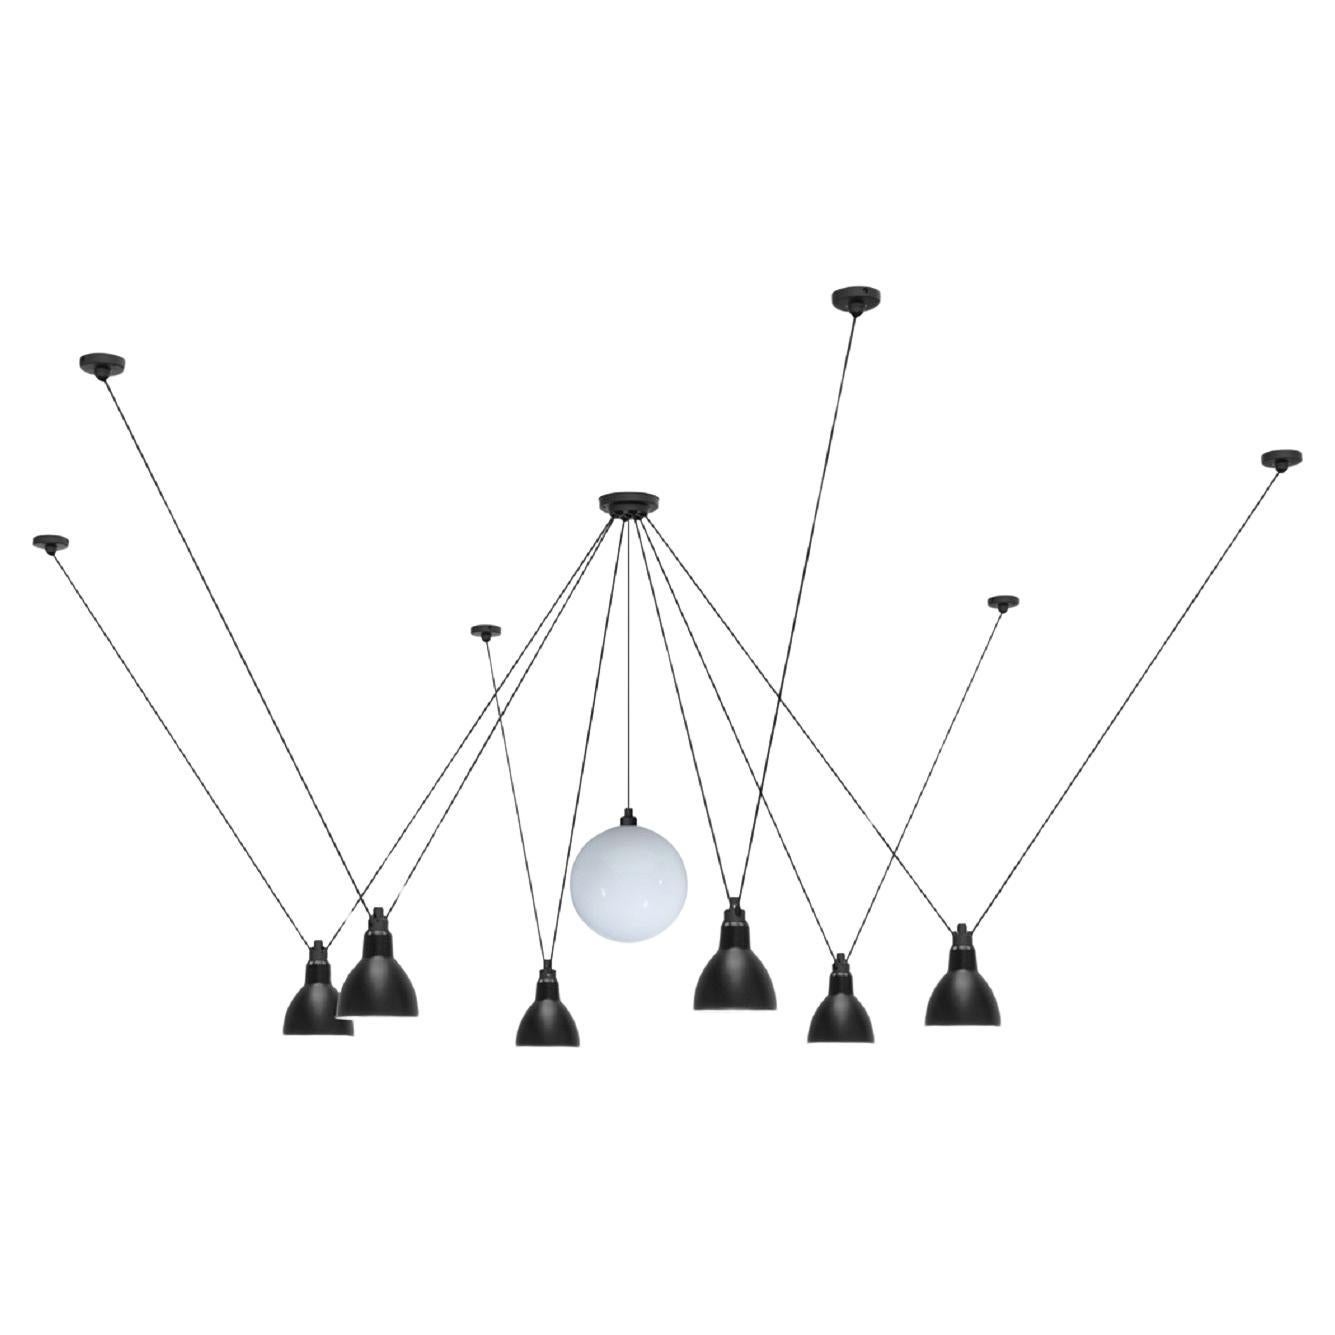 DCW Editions Les Acrobates N°327 L Round Pendant Lamp in Black & Glassball 175 For Sale